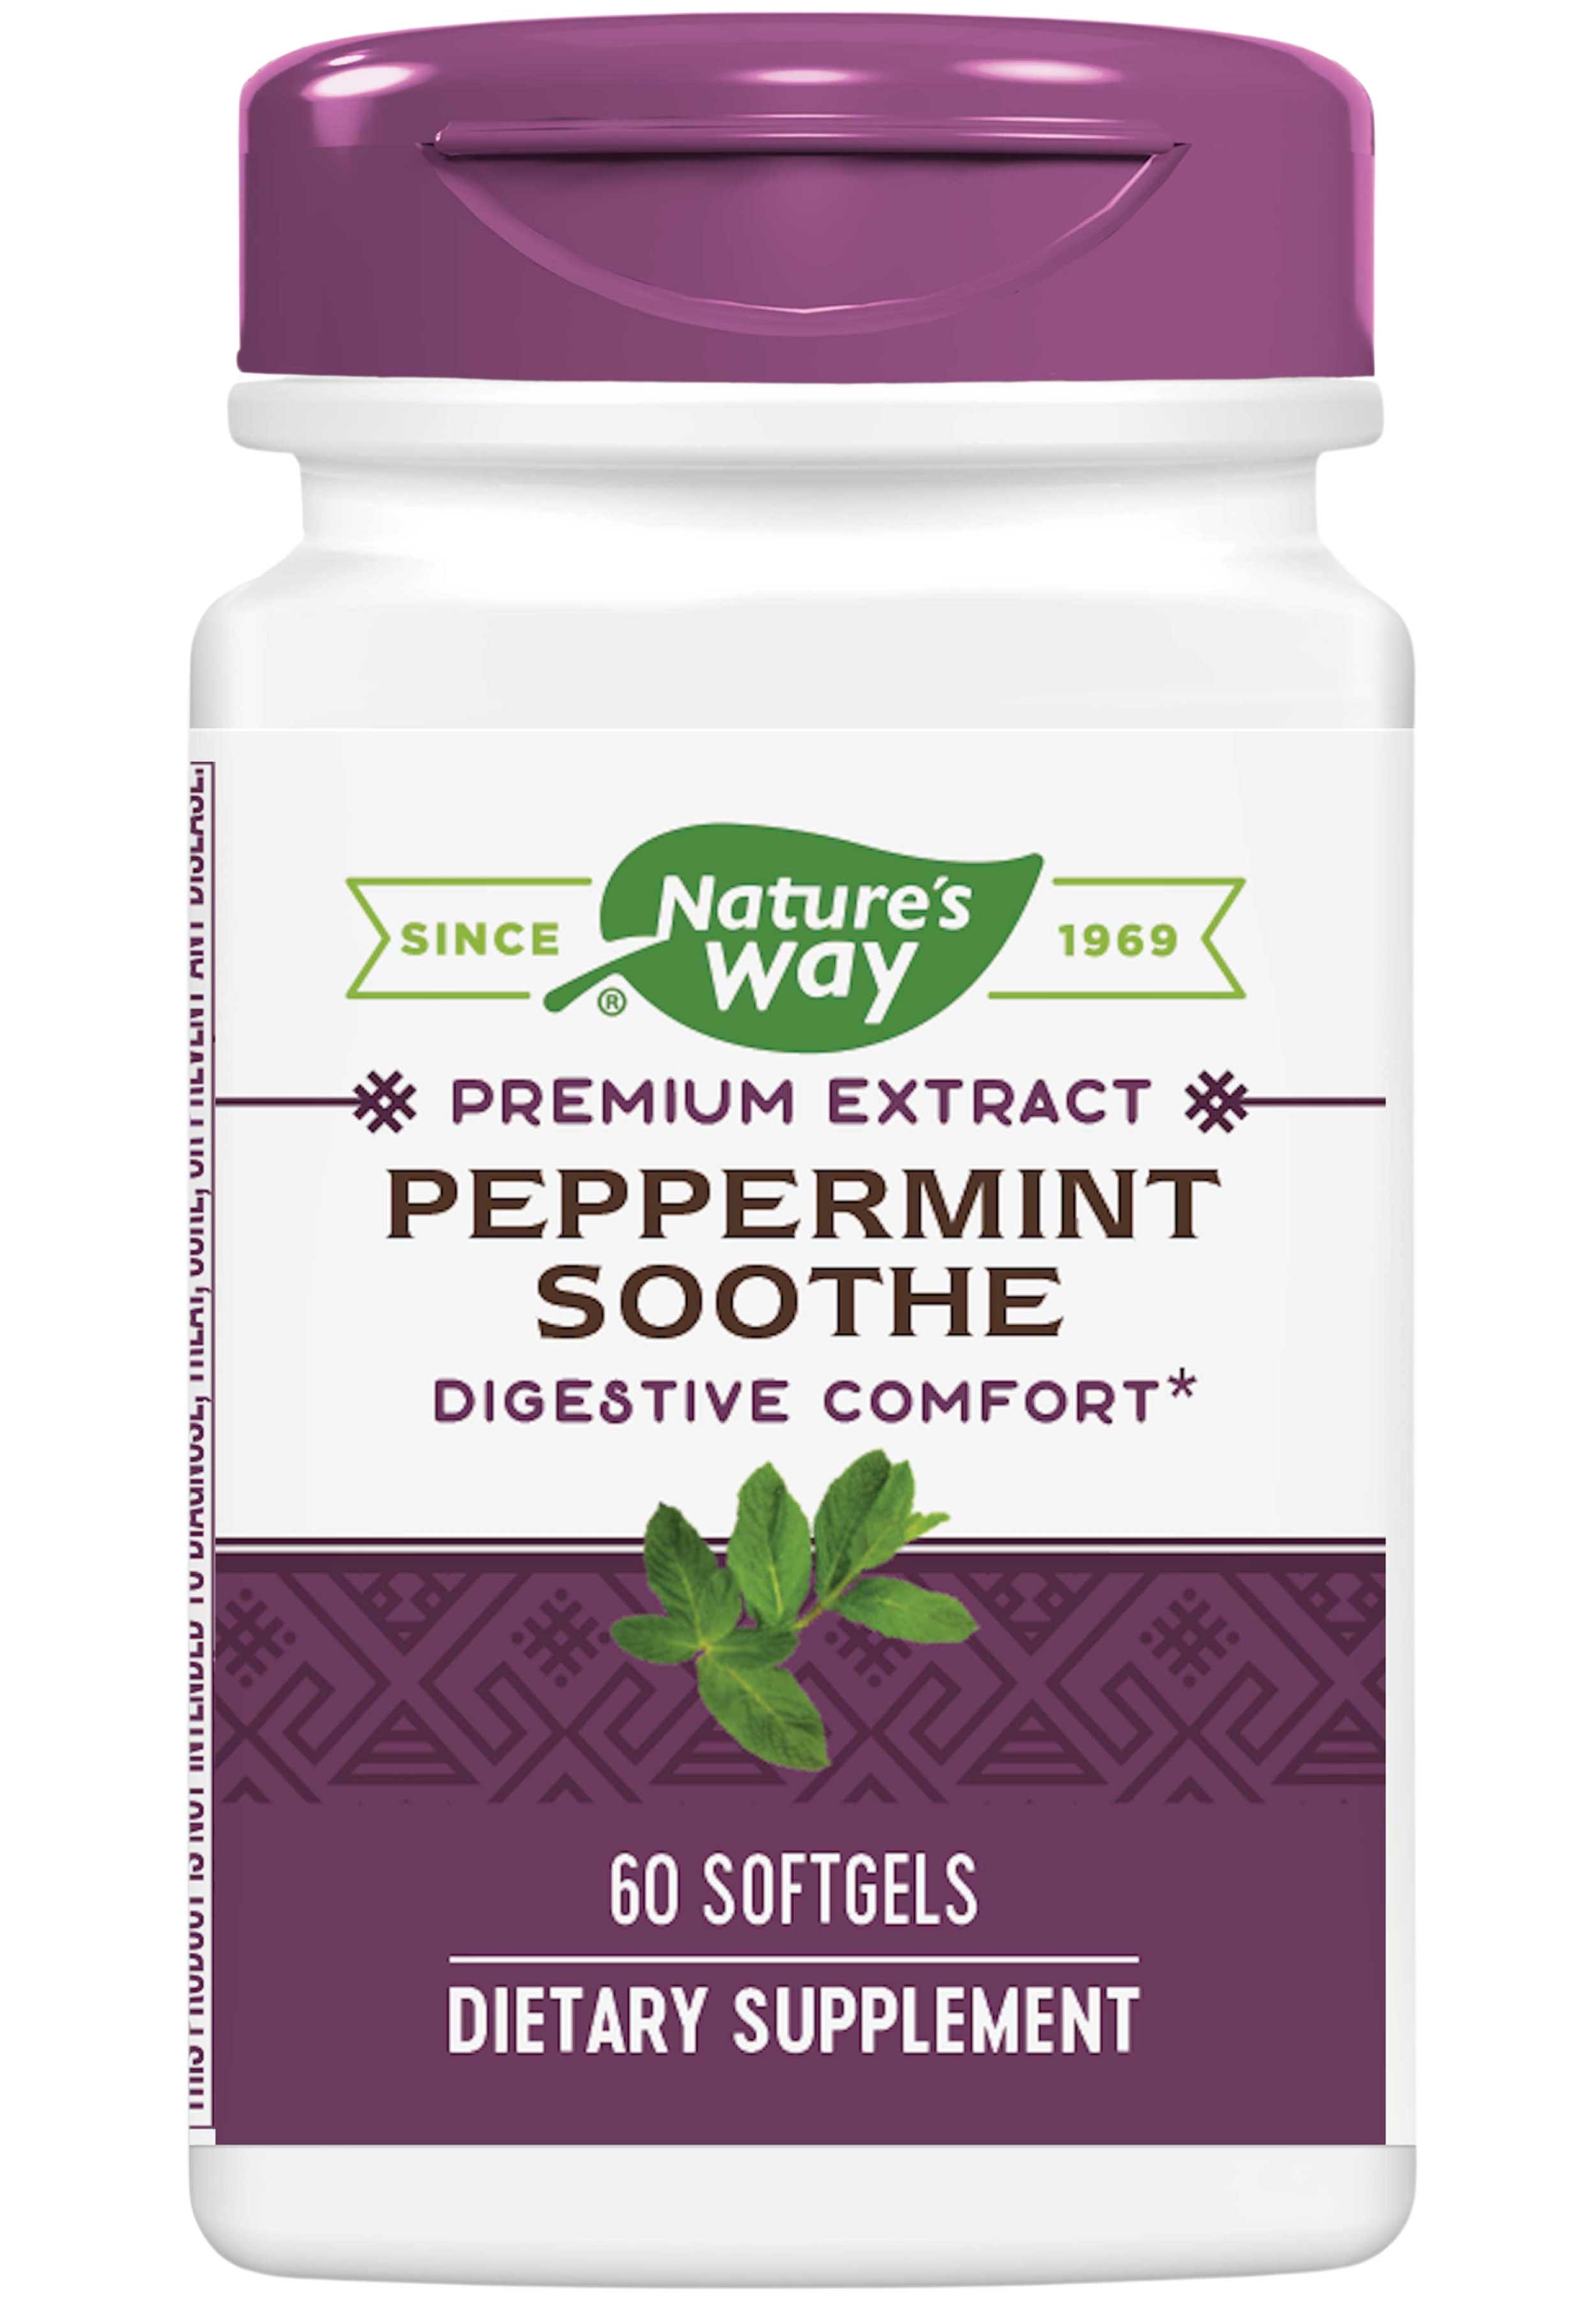 Nature's Way Peppermint Soothe Premium Extract